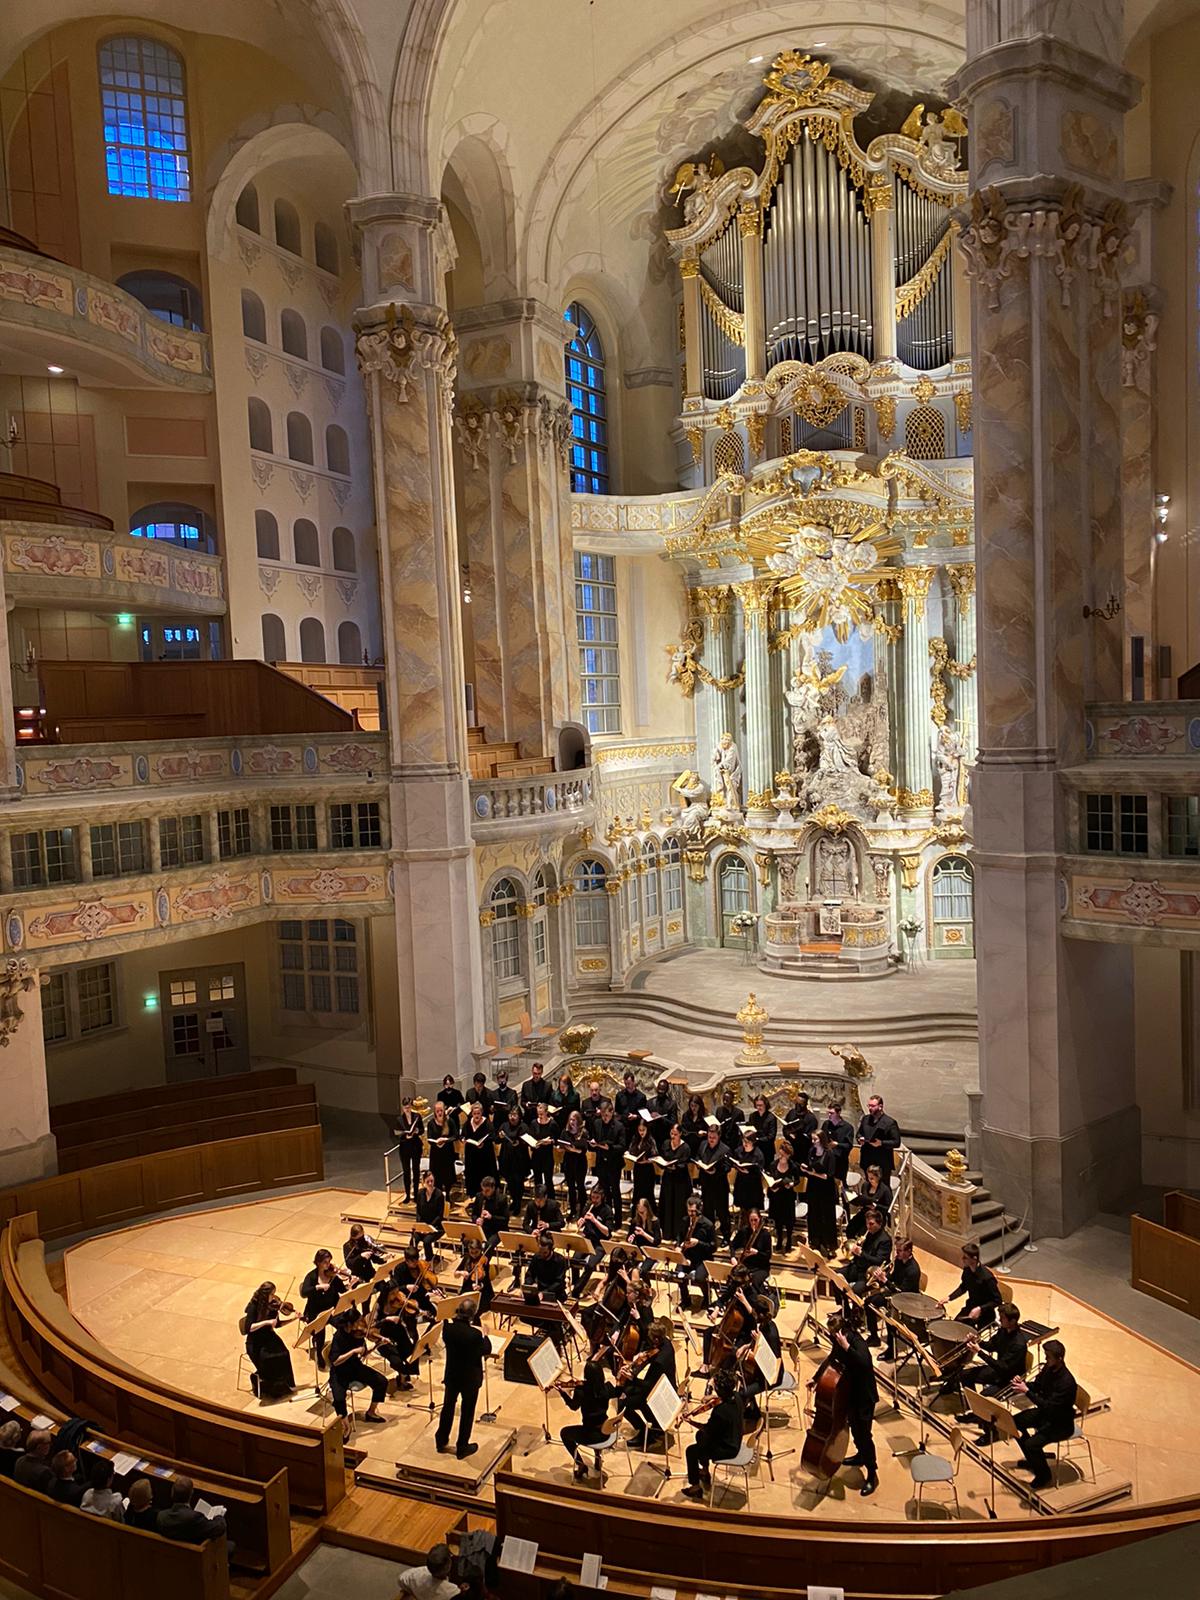 A group of students performing in an ornate baroque church sanctuary